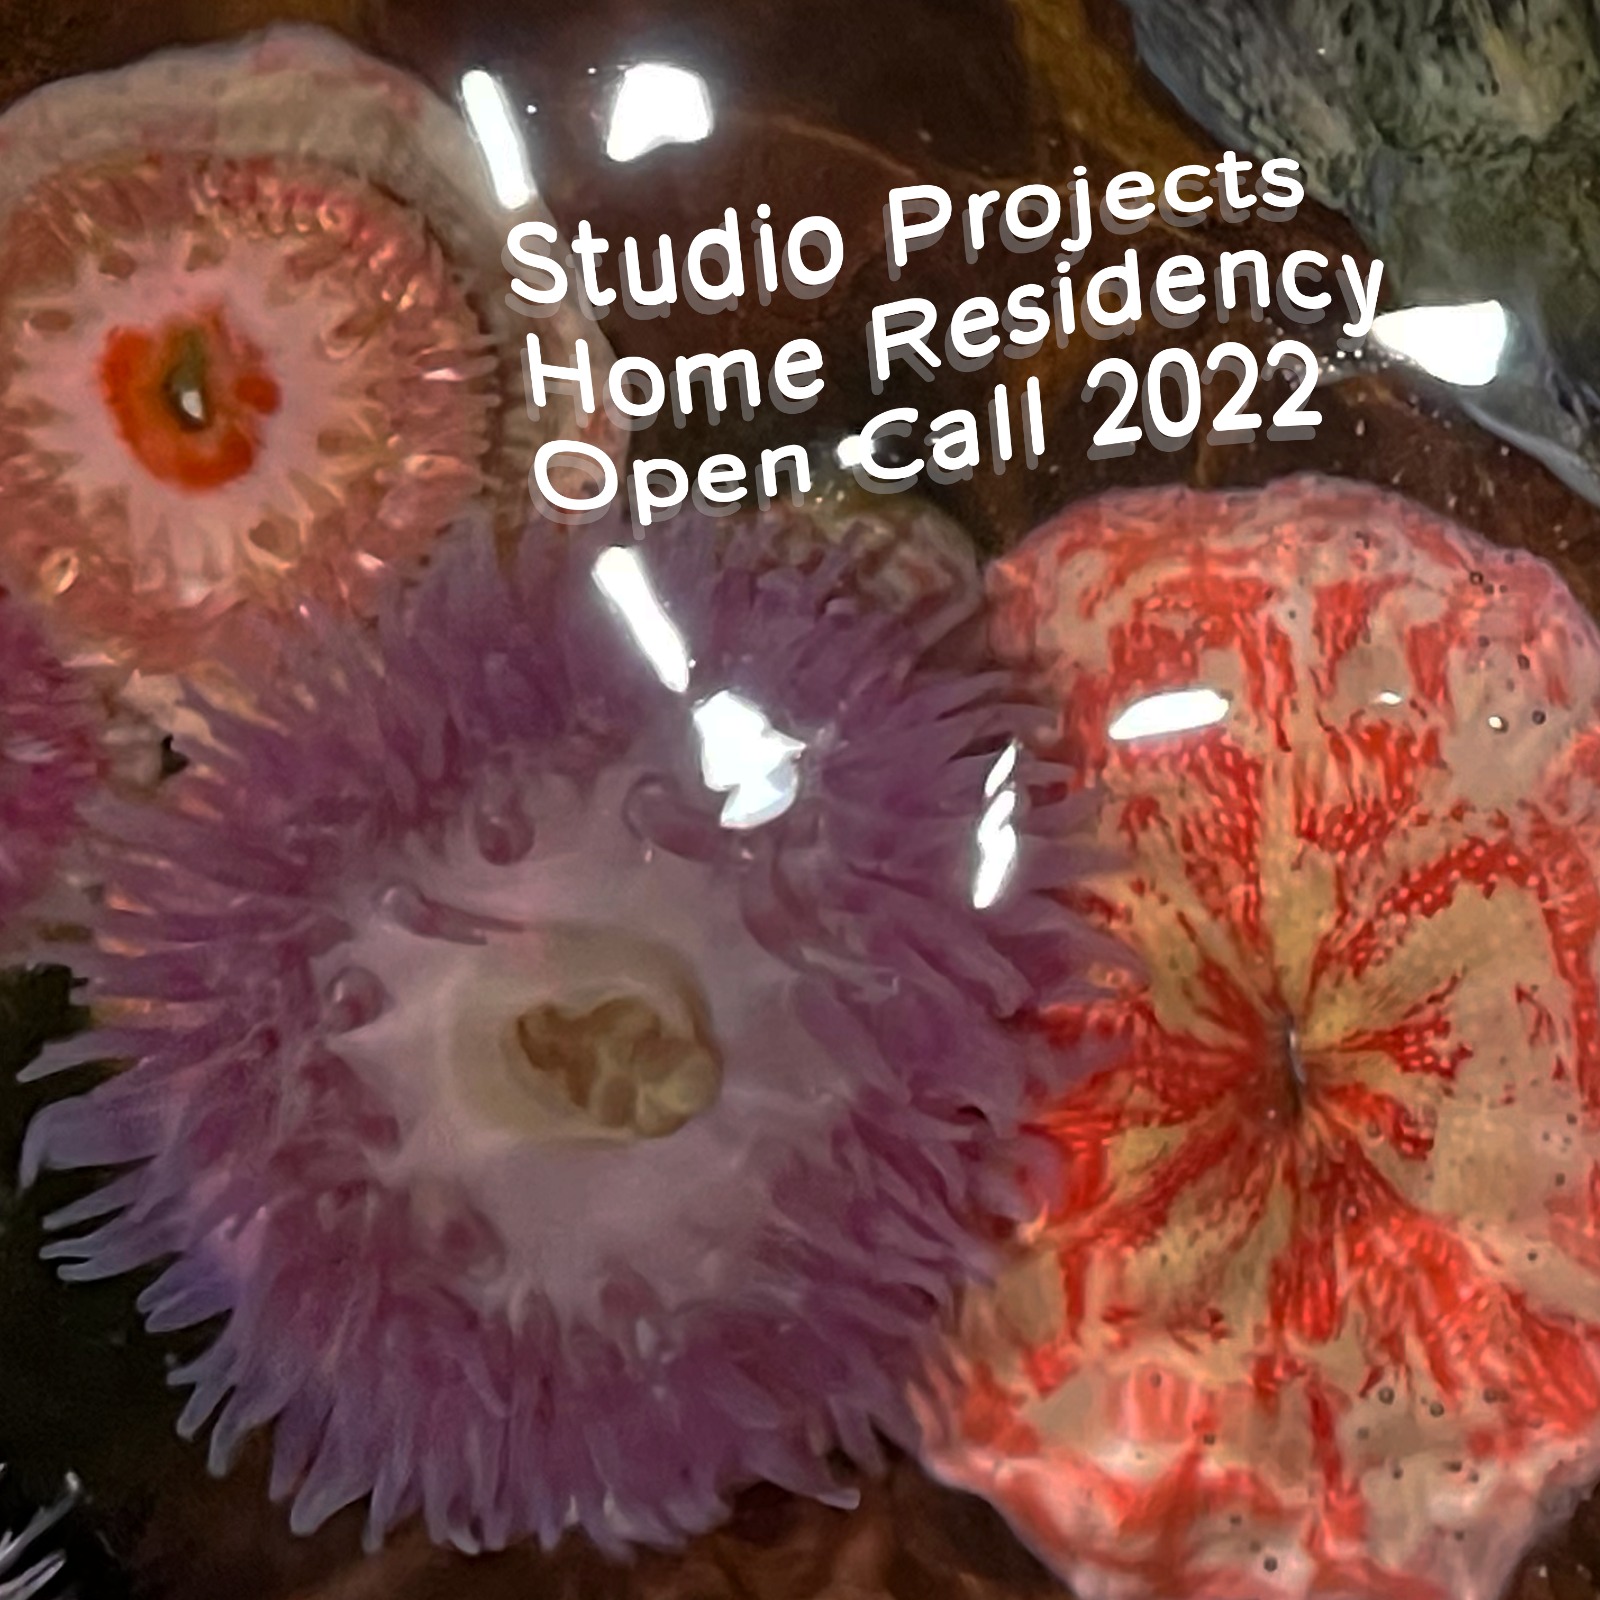 a few red tones sea anemone with text Studio Projects Home Residency Open Call 2022